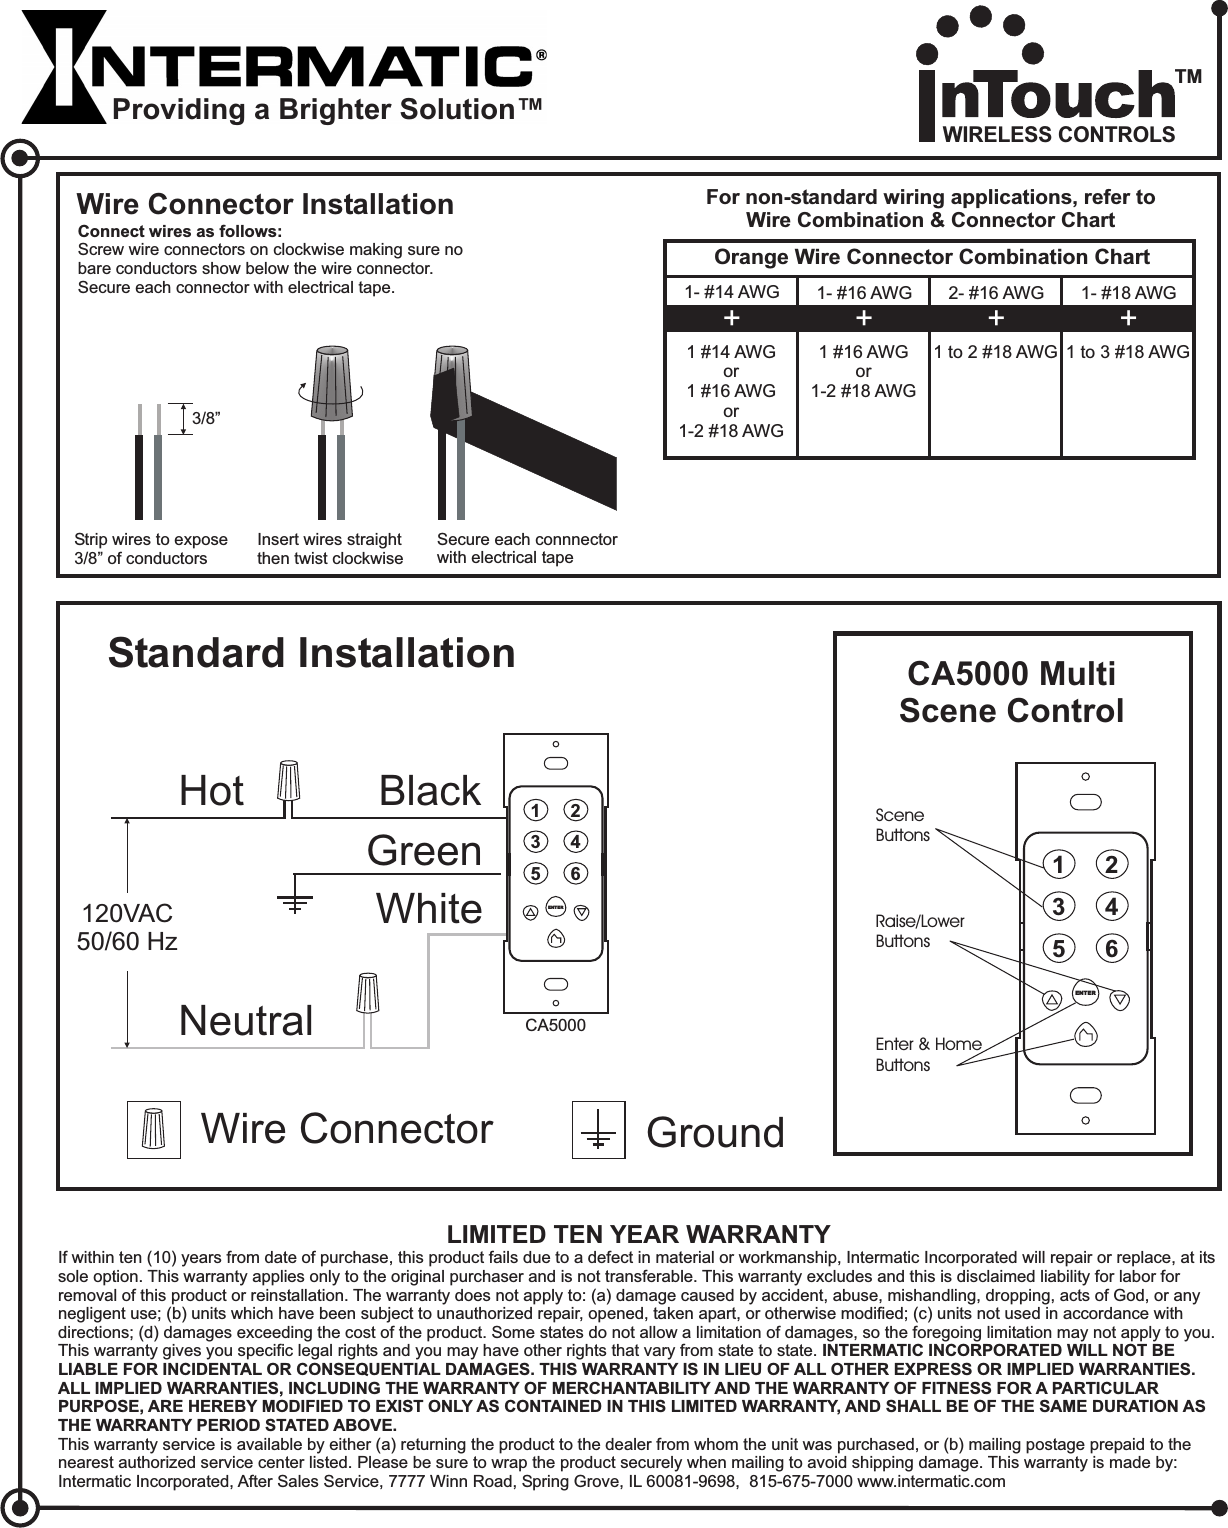 WhiteStandard InstallationHot BlackNeutralWire Connector GroundGreen120VAC50/60 HzCA5000Raise/LowerButtonsSceneButtons135246ENTEREnter &amp; HomeButtons135246ENTERLIMITED TEN YEAR WARRANTYIf within ten (10) years from date of purchase, this product fails due to a defect in material or workmanship, Intermatic Incorporated will repair or replace, at itssole option. This warranty applies only to the original purchaser and is not transferable. This warranty excludes and this is disclaimed liability for labor forremoval of this product or reinstallation. The warranty does not apply to: (a) damage caused by accident, abuse, mishandling, dropping, acts of God, or anynegligent use; (b) units which have been subject to unauthorized repair, opened, taken apart, or otherwise modified; (c) units not used in accordance withdirections; (d) damages exceeding the cost of the product. Some states do not allow a limitation of damages, so the foregoing limitation may not apply to you.This warranty gives you specific legal rights and you may have other rights that vary from state to state.This warranty service is available by either (a) returning the product to the dealer from whom the unit was purchased, or (b) mailing postage prepaid to thenearest authorized service center listed. Please be sure to wrap the product securely when mailing to avoid shipping damage. This warranty is made by:Intermatic Incorporated, After Sales Service, 7777 Winn Road, Spring Grove, IL 60081-9698, 815-675-7000 www.intermatic.comINTERMATIC INCORPORATED WILL NOT BELIABLE FOR INCIDENTAL OR CONSEQUENTIAL DAMAGES. THIS WARRANTY IS IN LIEU OF ALL OTHER EXPRESS OR IMPLIED WARRANTIES.ALL IMPLIED WARRANTIES, INCLUDING THE WARRANTY OF MERCHANTABILITY AND THE WARRANTY OF FITNESS FOR A PARTICULARPURPOSE, ARE HEREBY MODIFIED TO EXIST ONLY AS CONTAINED IN THIS LIMITED WARRANTY, AND SHALL BE OF THE SAME DURATION ASTHE WARRANTY PERIOD STATED ABOVE.Wire Connector InstallationConnect wires as follows:Screw wire connectors on clockwise making sure nobare conductors show below the wire connector.Secure each connector with electrical tape.Insert wires straightthen twist clockwiseSecure each connnectorwith electrical tapeFor non-standard wiring applications, refer toWire Combination &amp; Connector ChartOrange Wire Connector Combination Chart1- #14 AWG1 #14 AWGor1 #16 AWGor1-2 #18 AWG+1- #16 AWG1 #16 AWGor1-2 #18 AWG+2- #16 AWG1to2#18AWG+1- #18 AWG1to3#18AWG+Strip wires to expose3/8” of conductors3/8”CA5000 MultiScene ControlProviding a Brighter Solution™WIRELESS CONTROLSTM